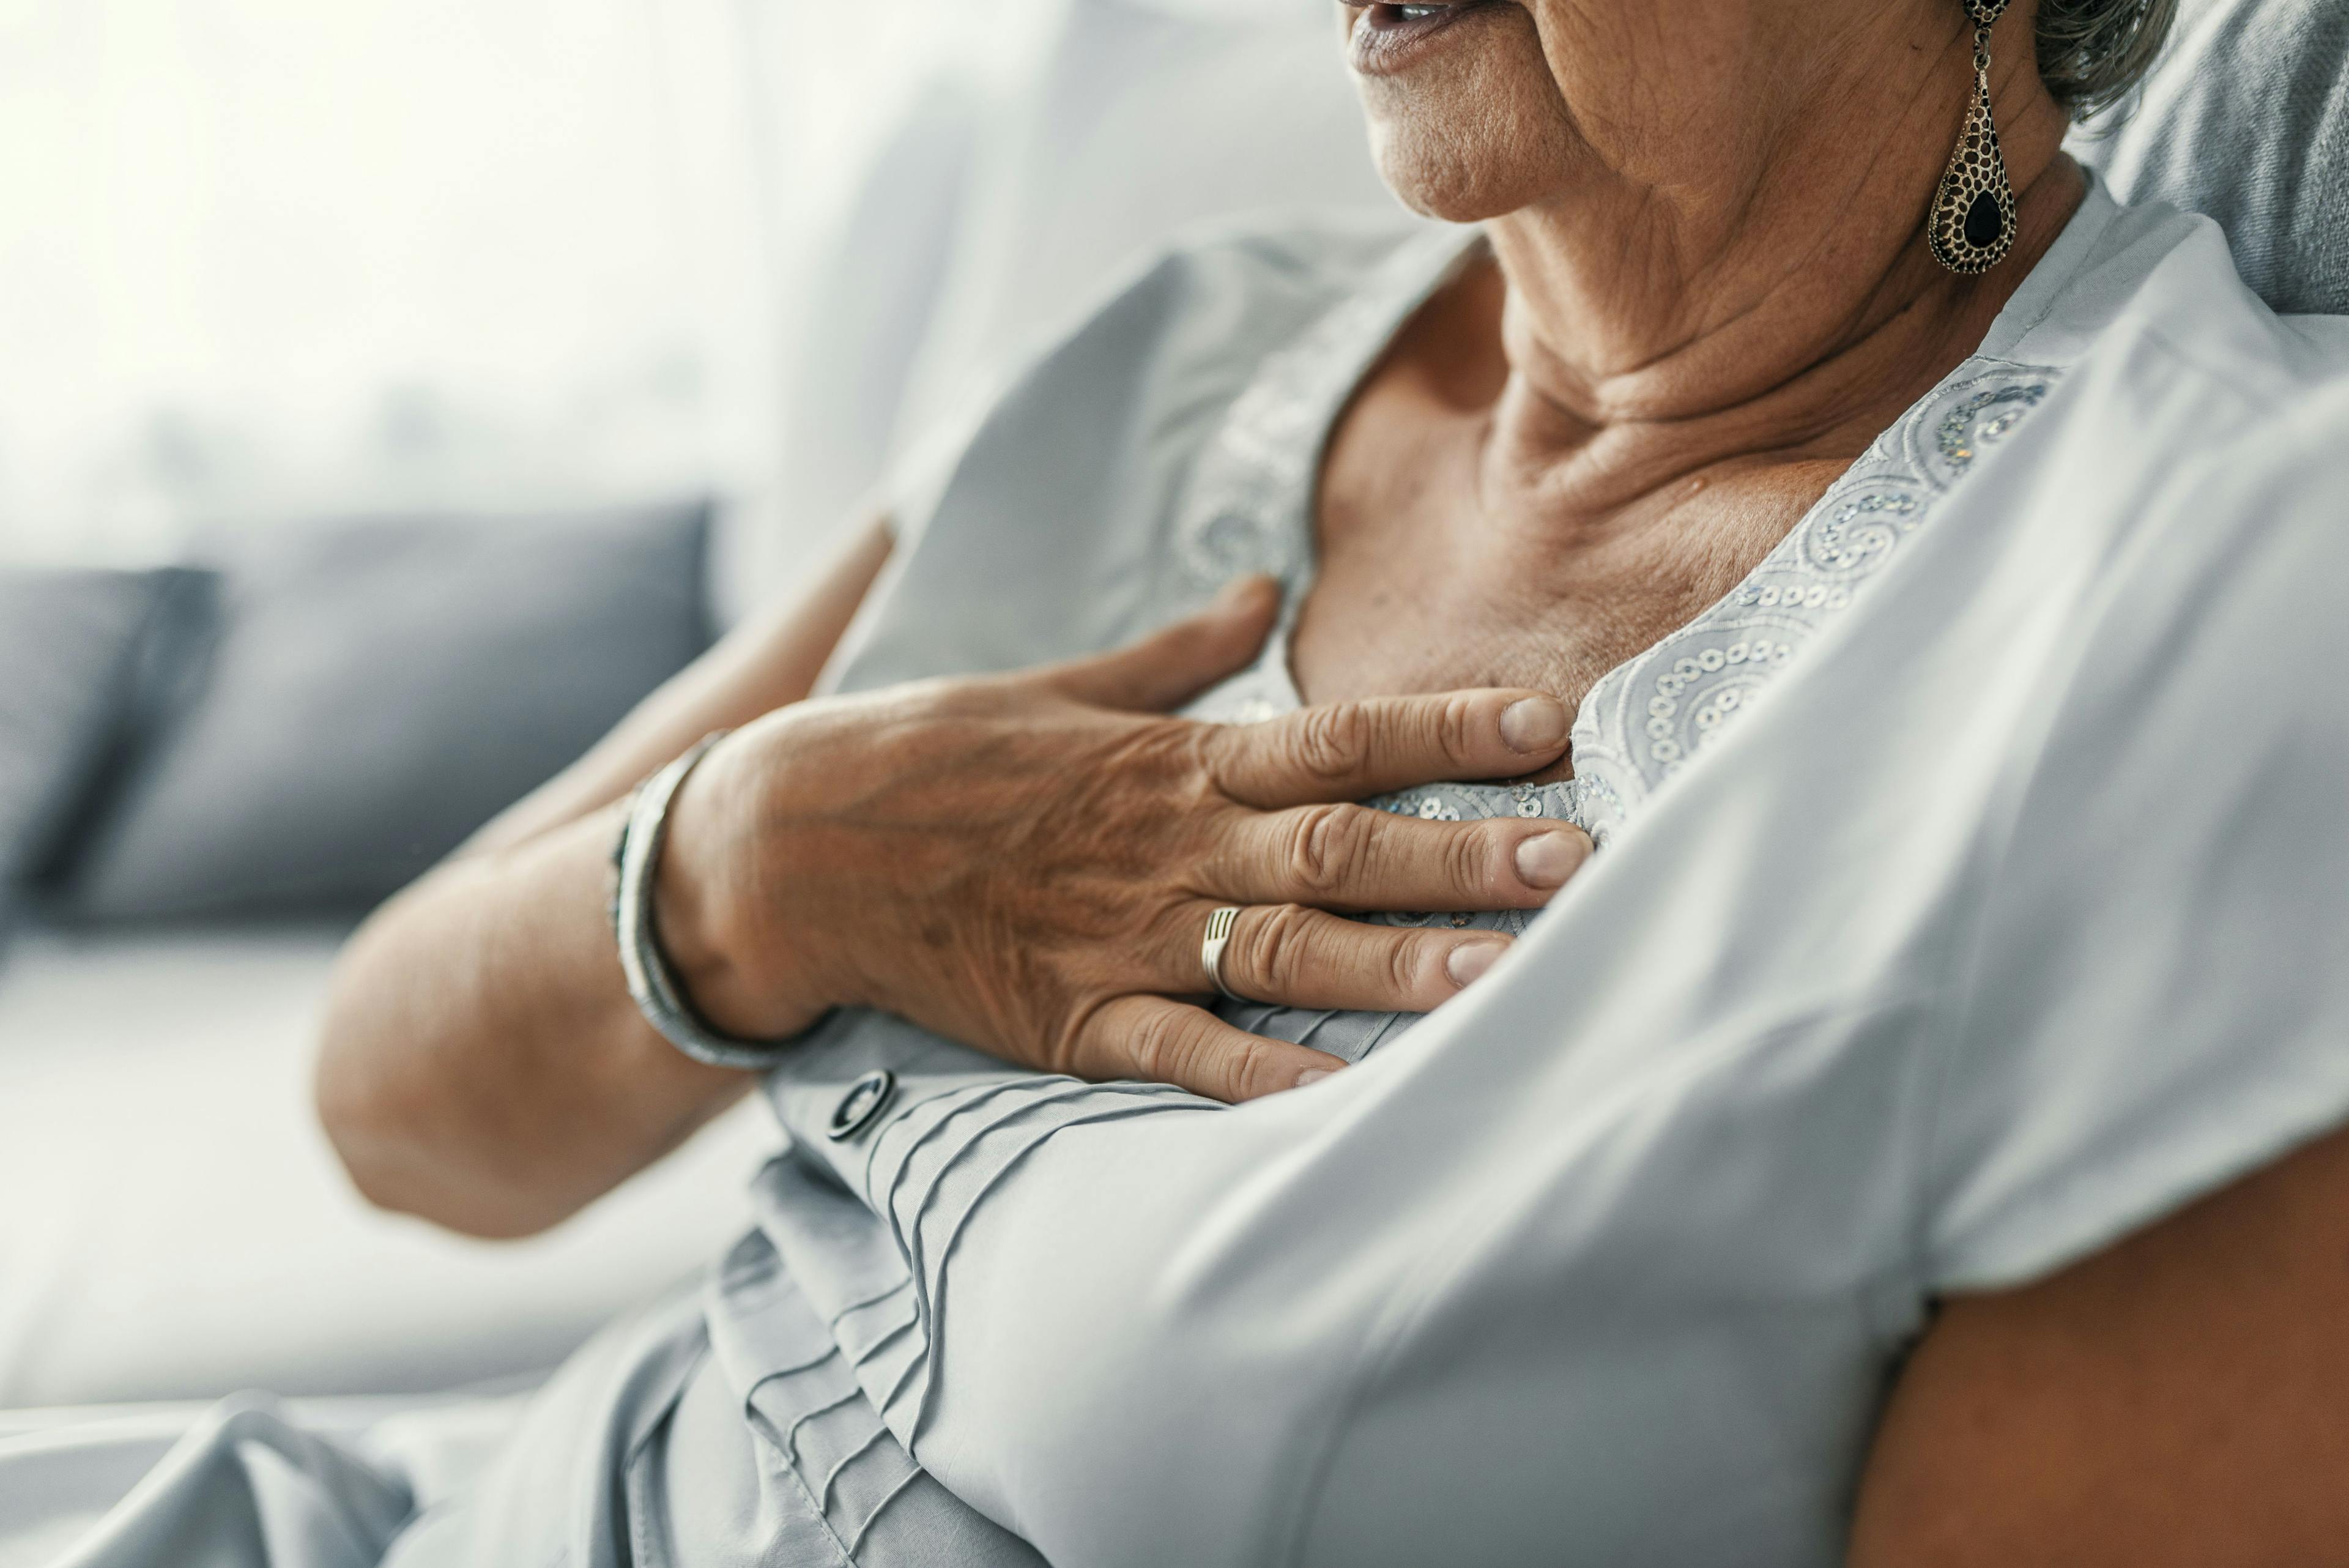 “We need to shift gears on how we think about heart disease risk in women, particularly as they approach and go through menopause,” said senior author. (Image: ©Dragana Gordic/stock.adobe.com)